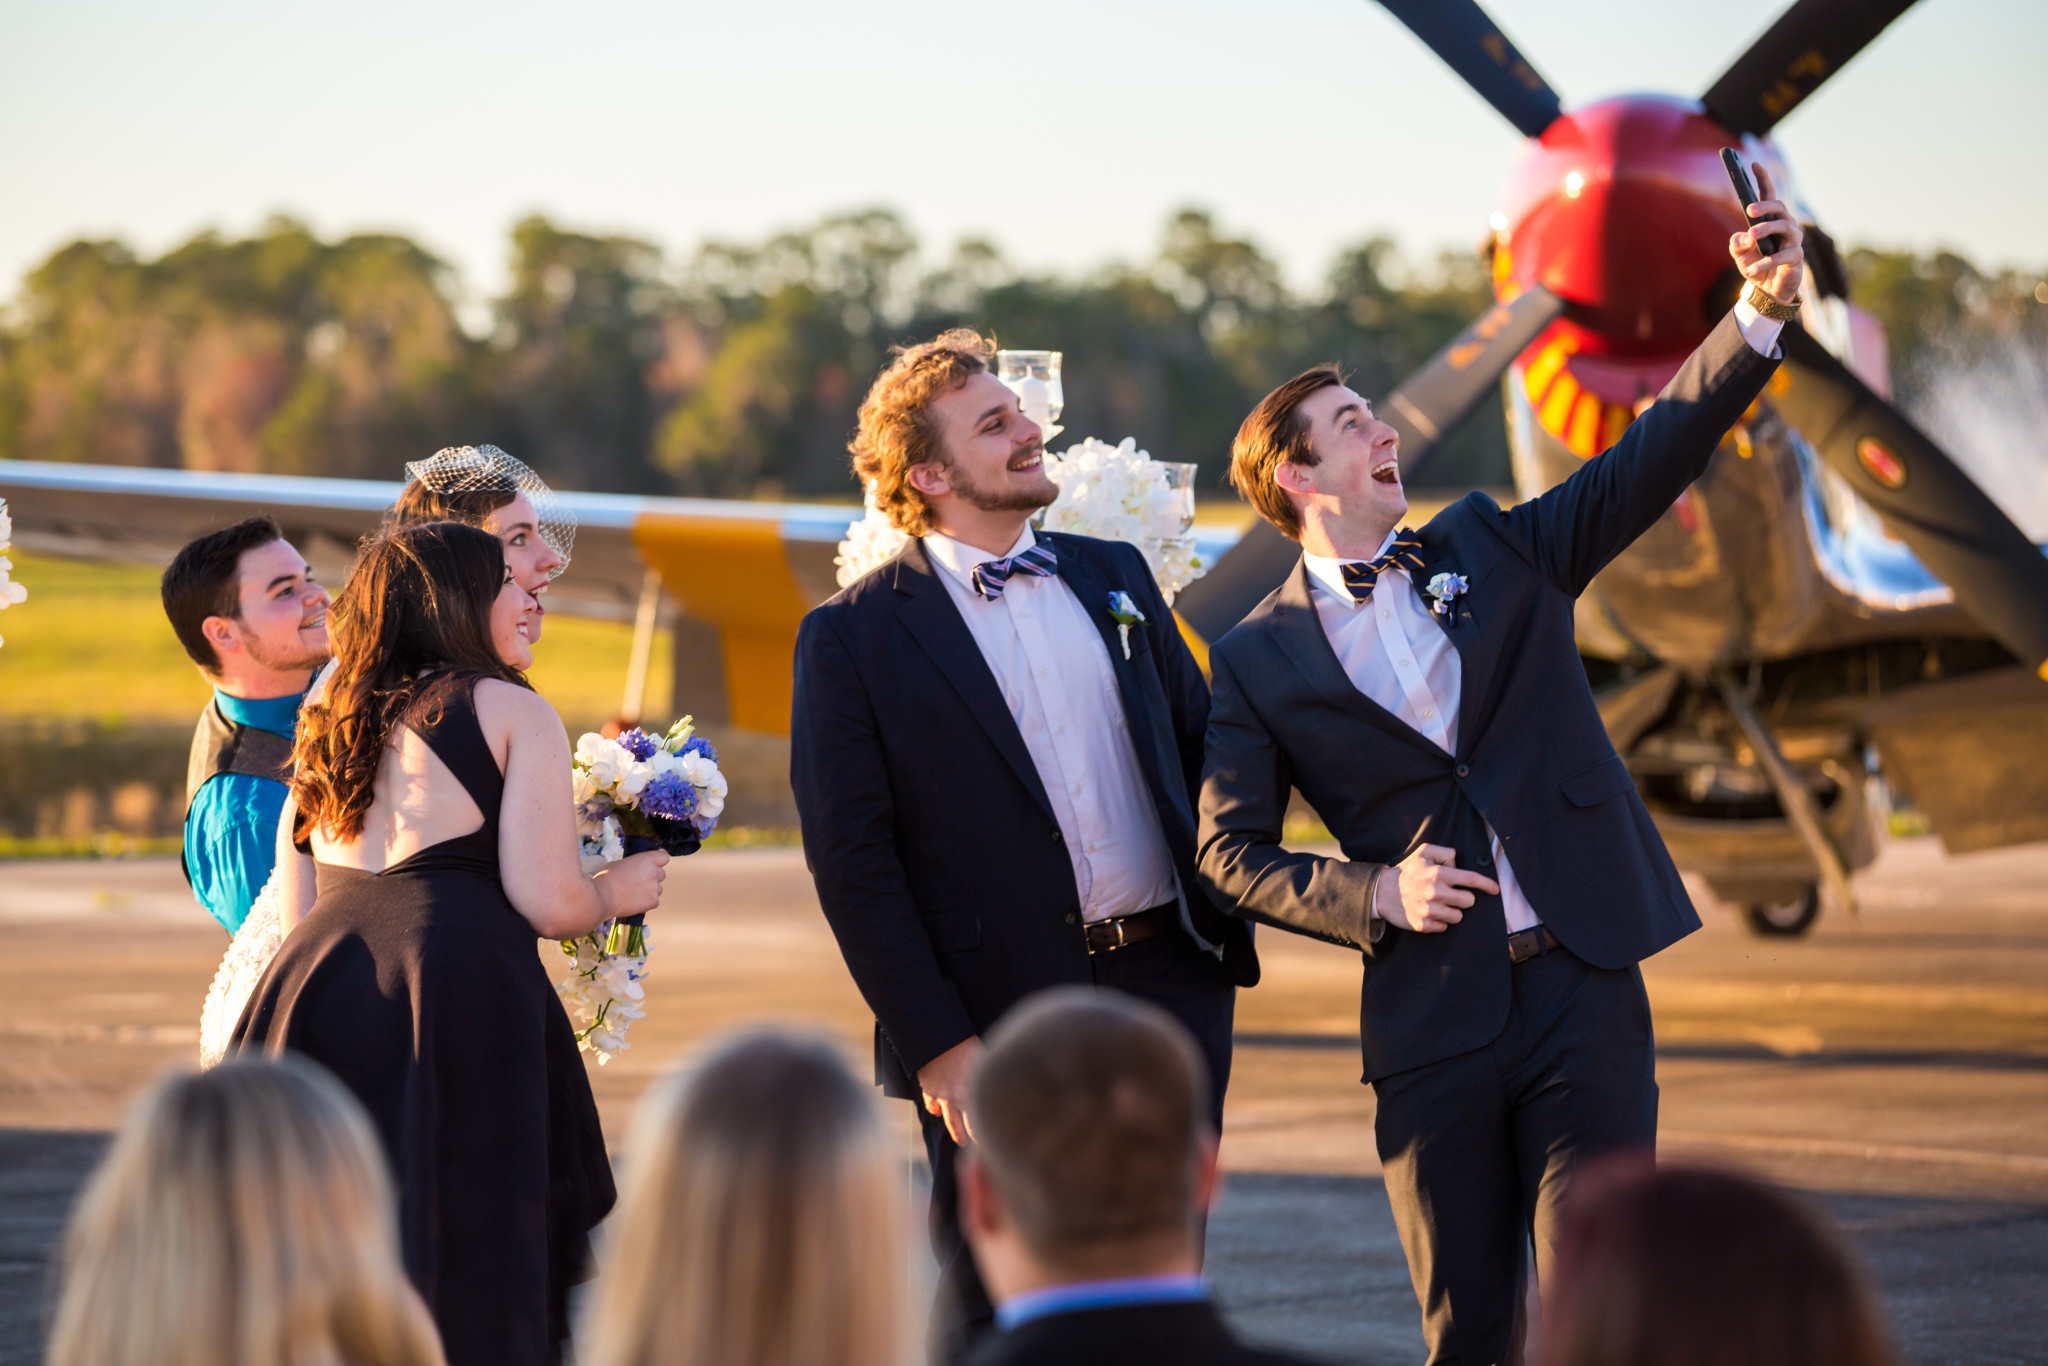 groom and best man selfie with p51 mustang in background